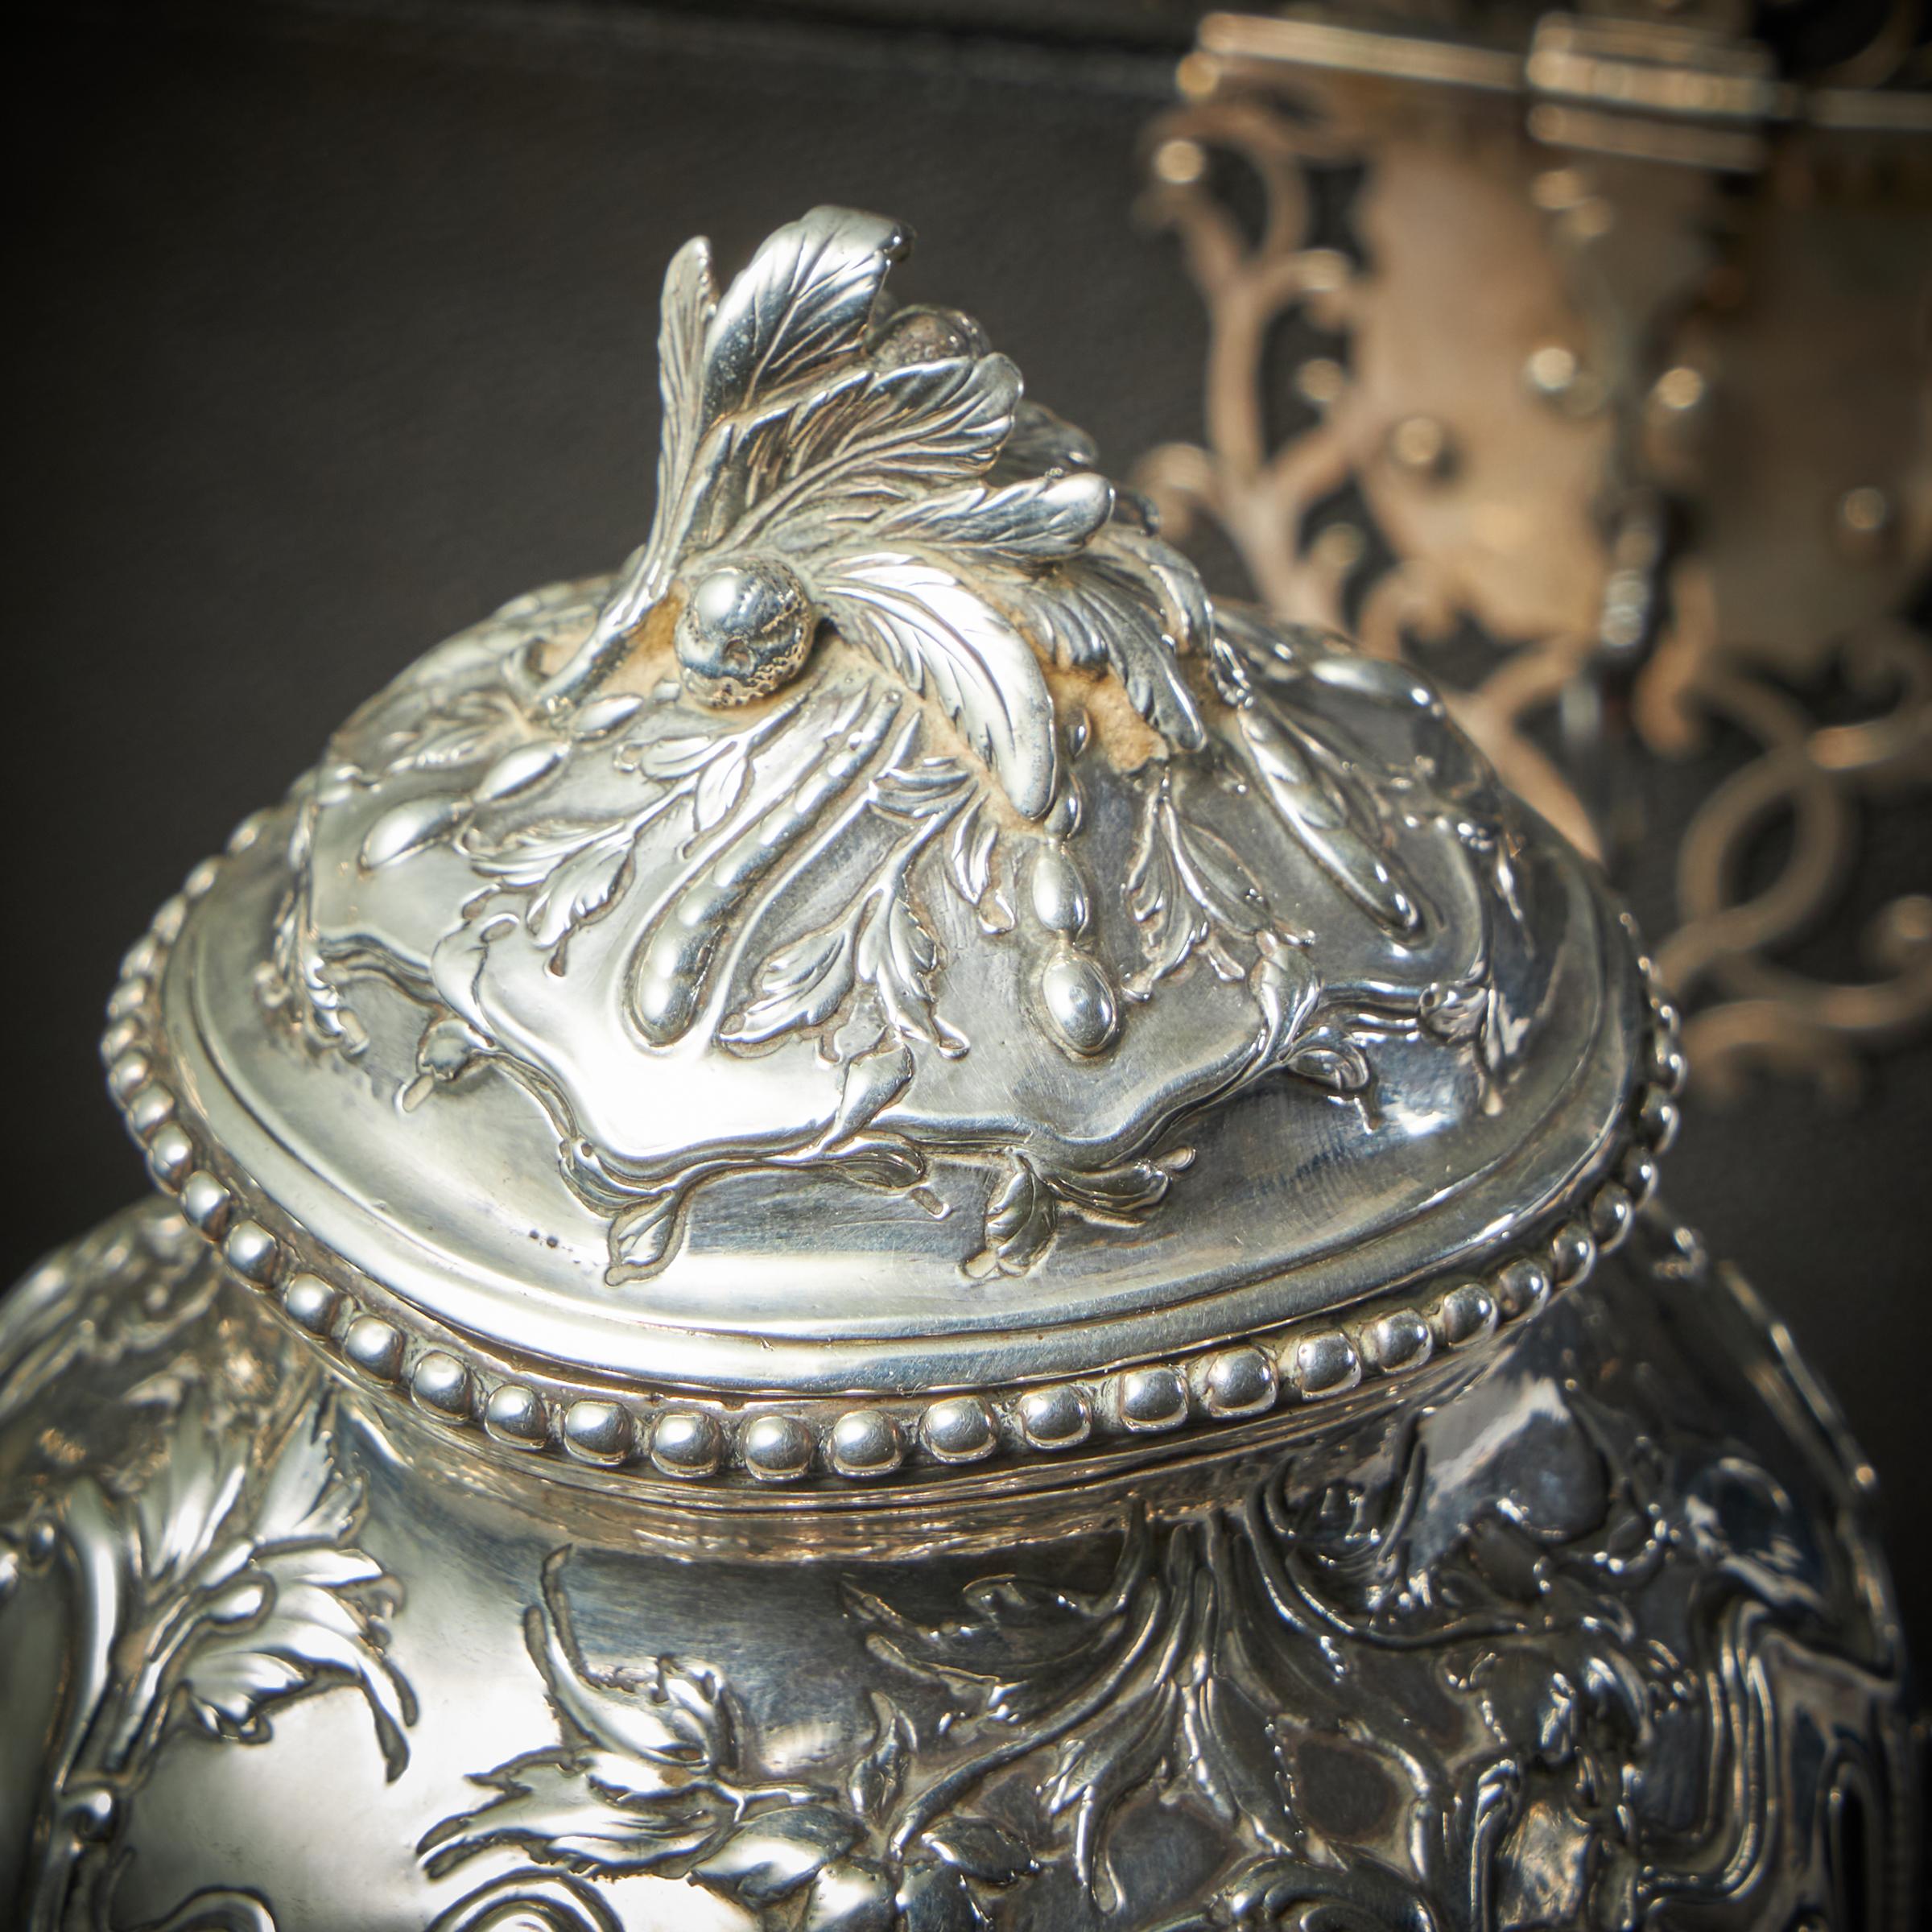 Rare Silver Mounted George II Shagreen Tea Caddy with Silver Rocco Canistors For Sale 7